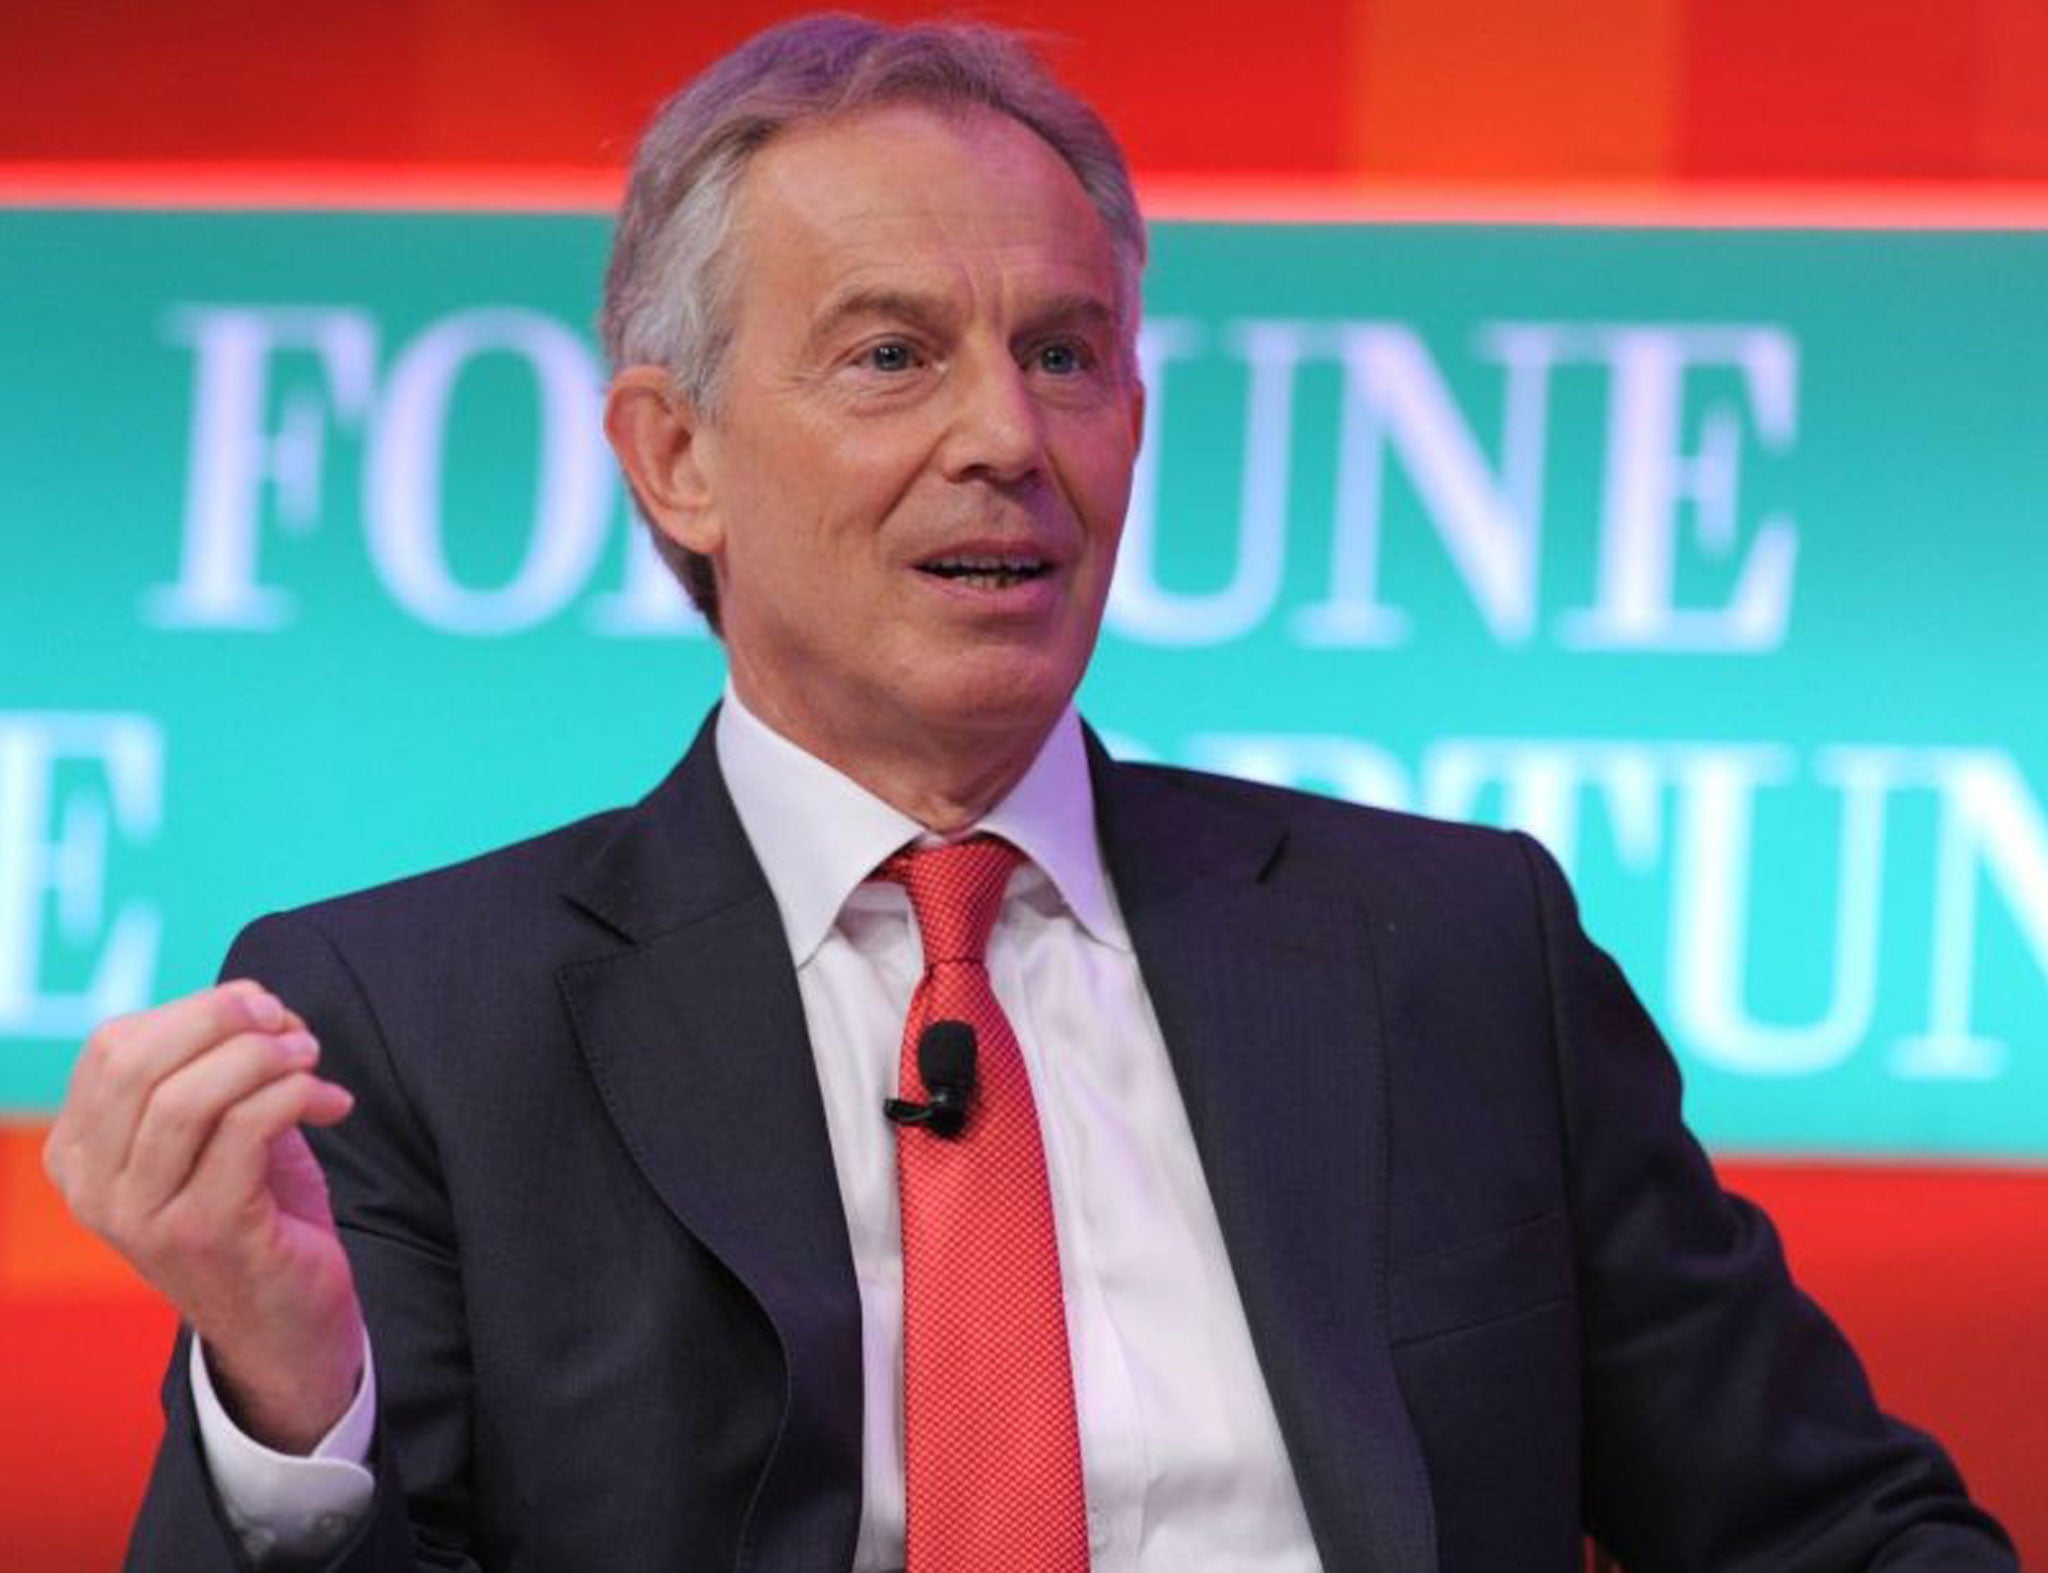 Tony Blair has said the Government should consider imposing a no-fly zone over Syria